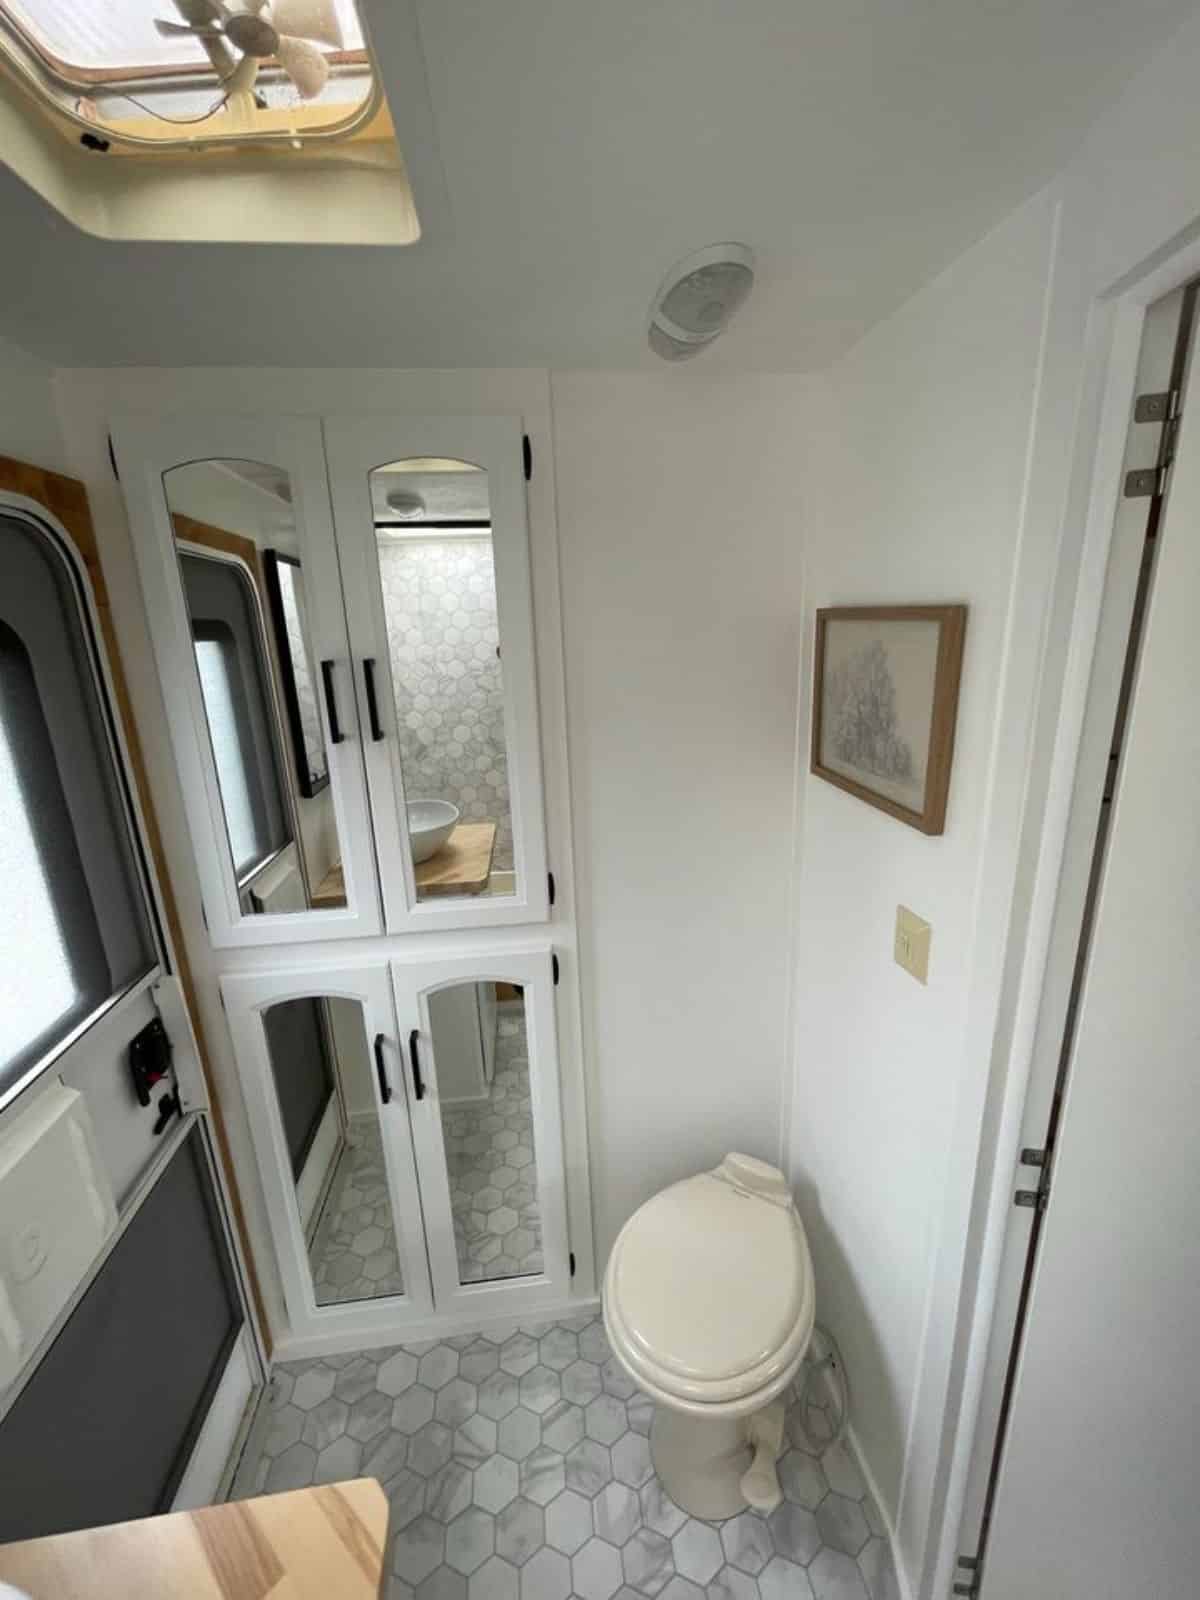 double door storage for all toiletries and standard toilet in bathroom